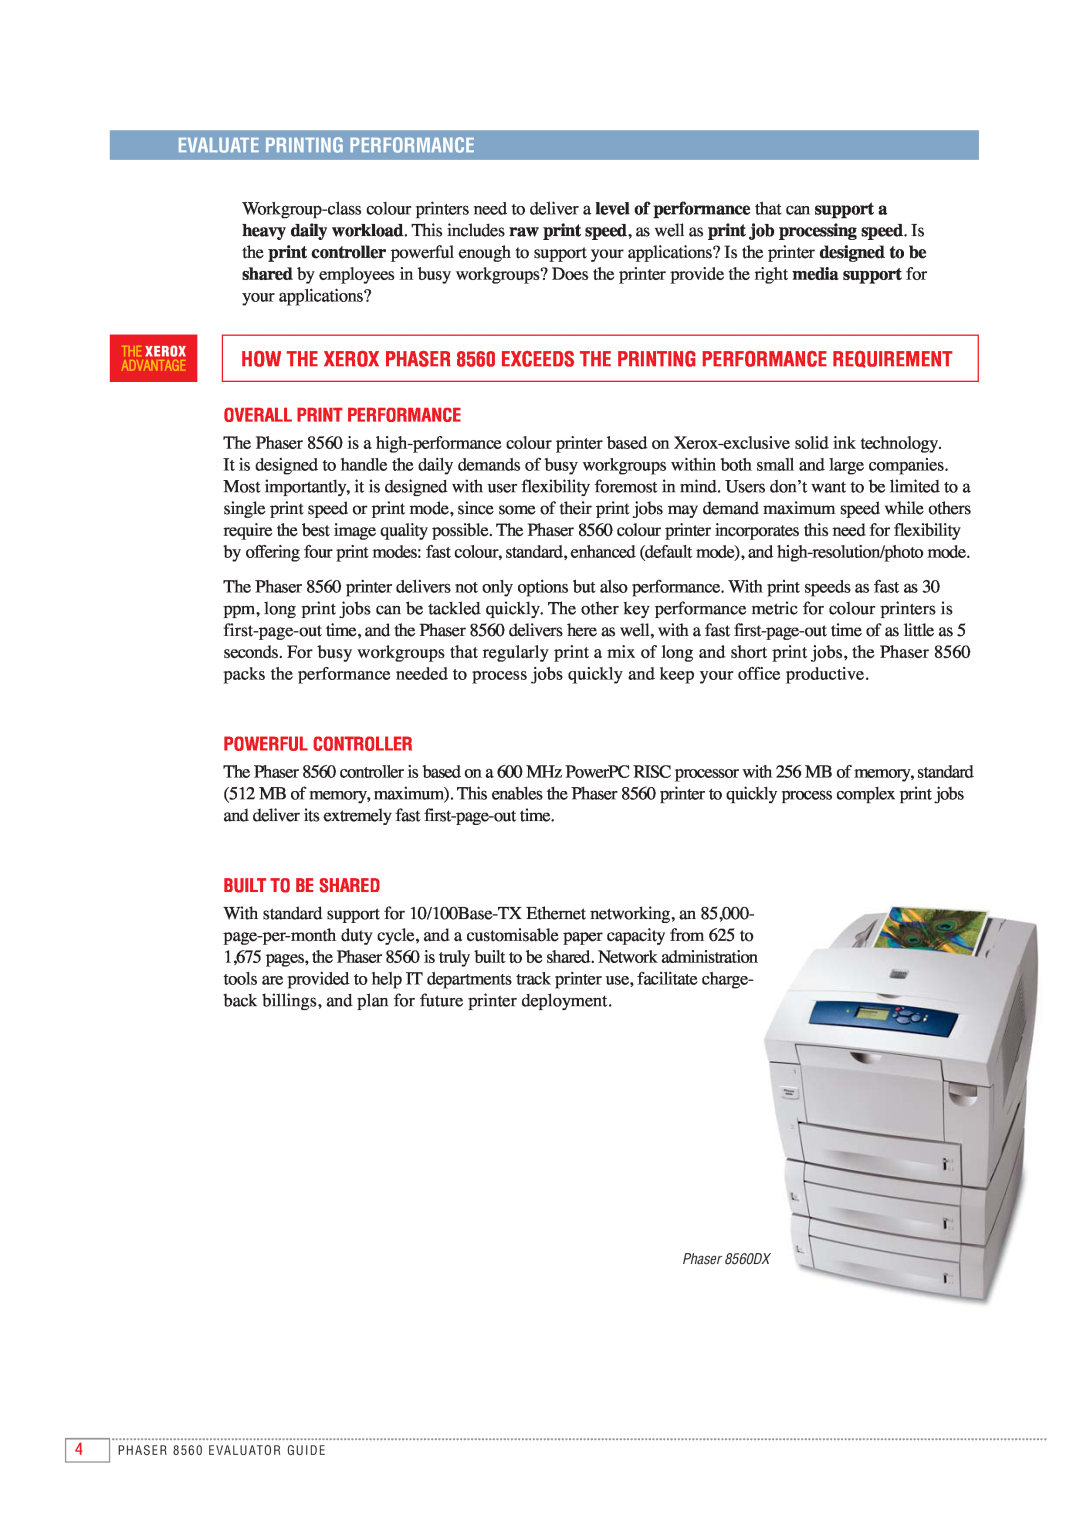 Xerox 8560 manual Evaluate Printing Performance, Overall Print Performance, Powerful Controller, Built To Be Shared 